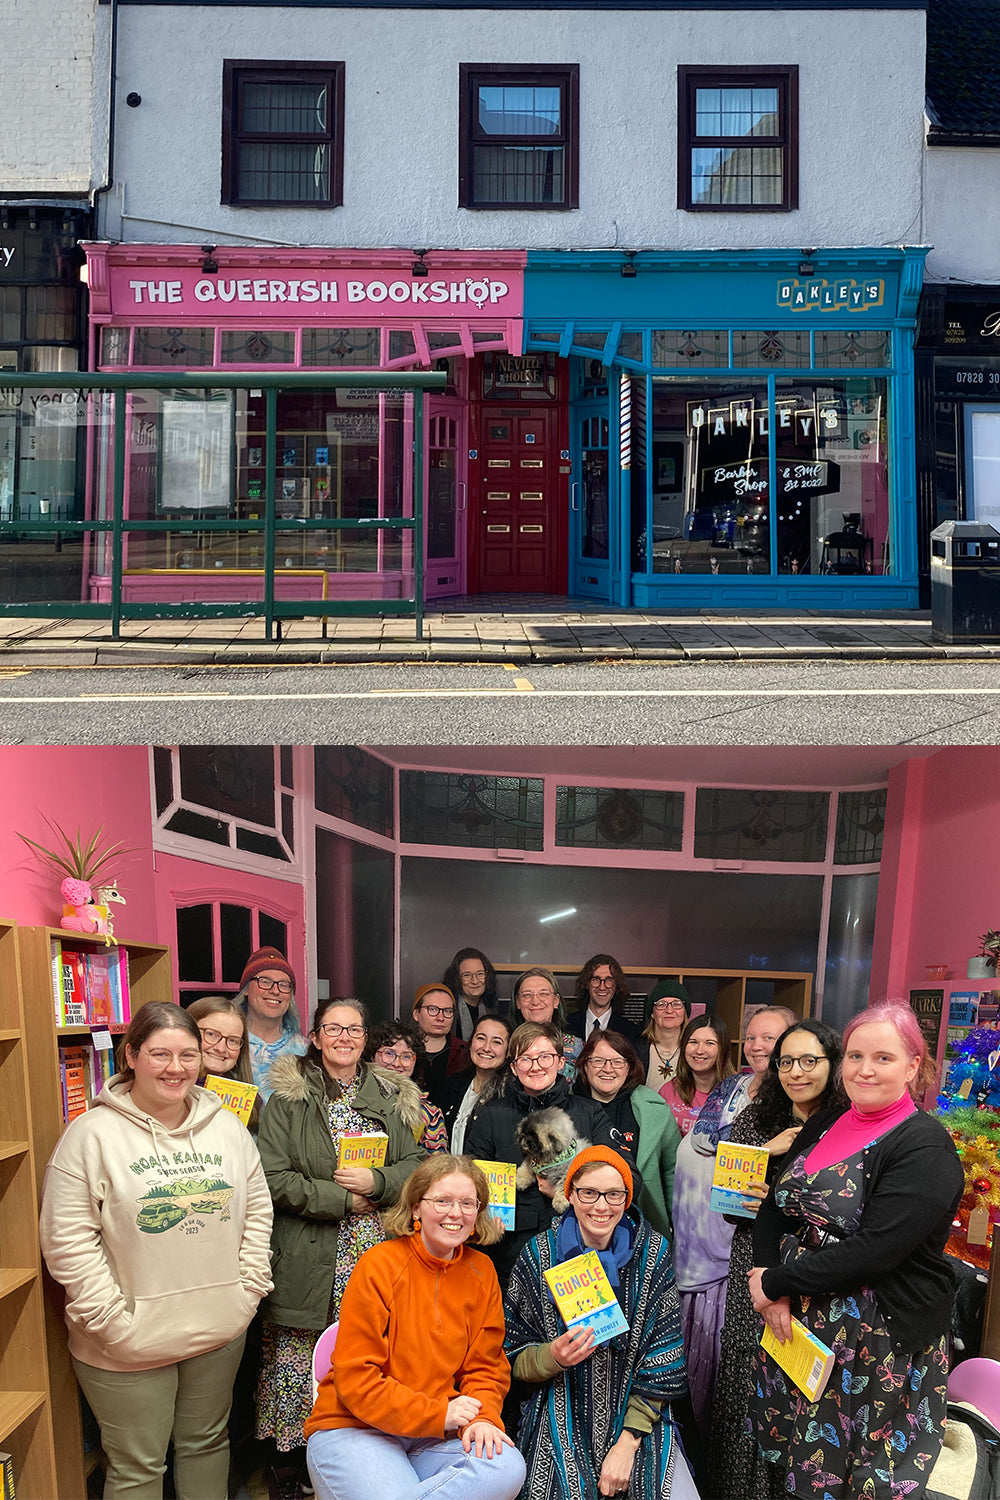 The exterior of The Queerish Bookshop in its bright pink glory. An image beneath shows the Queerish Book Club which is made up of a group of diverse queer people and allies who are all smiling at the camera. 